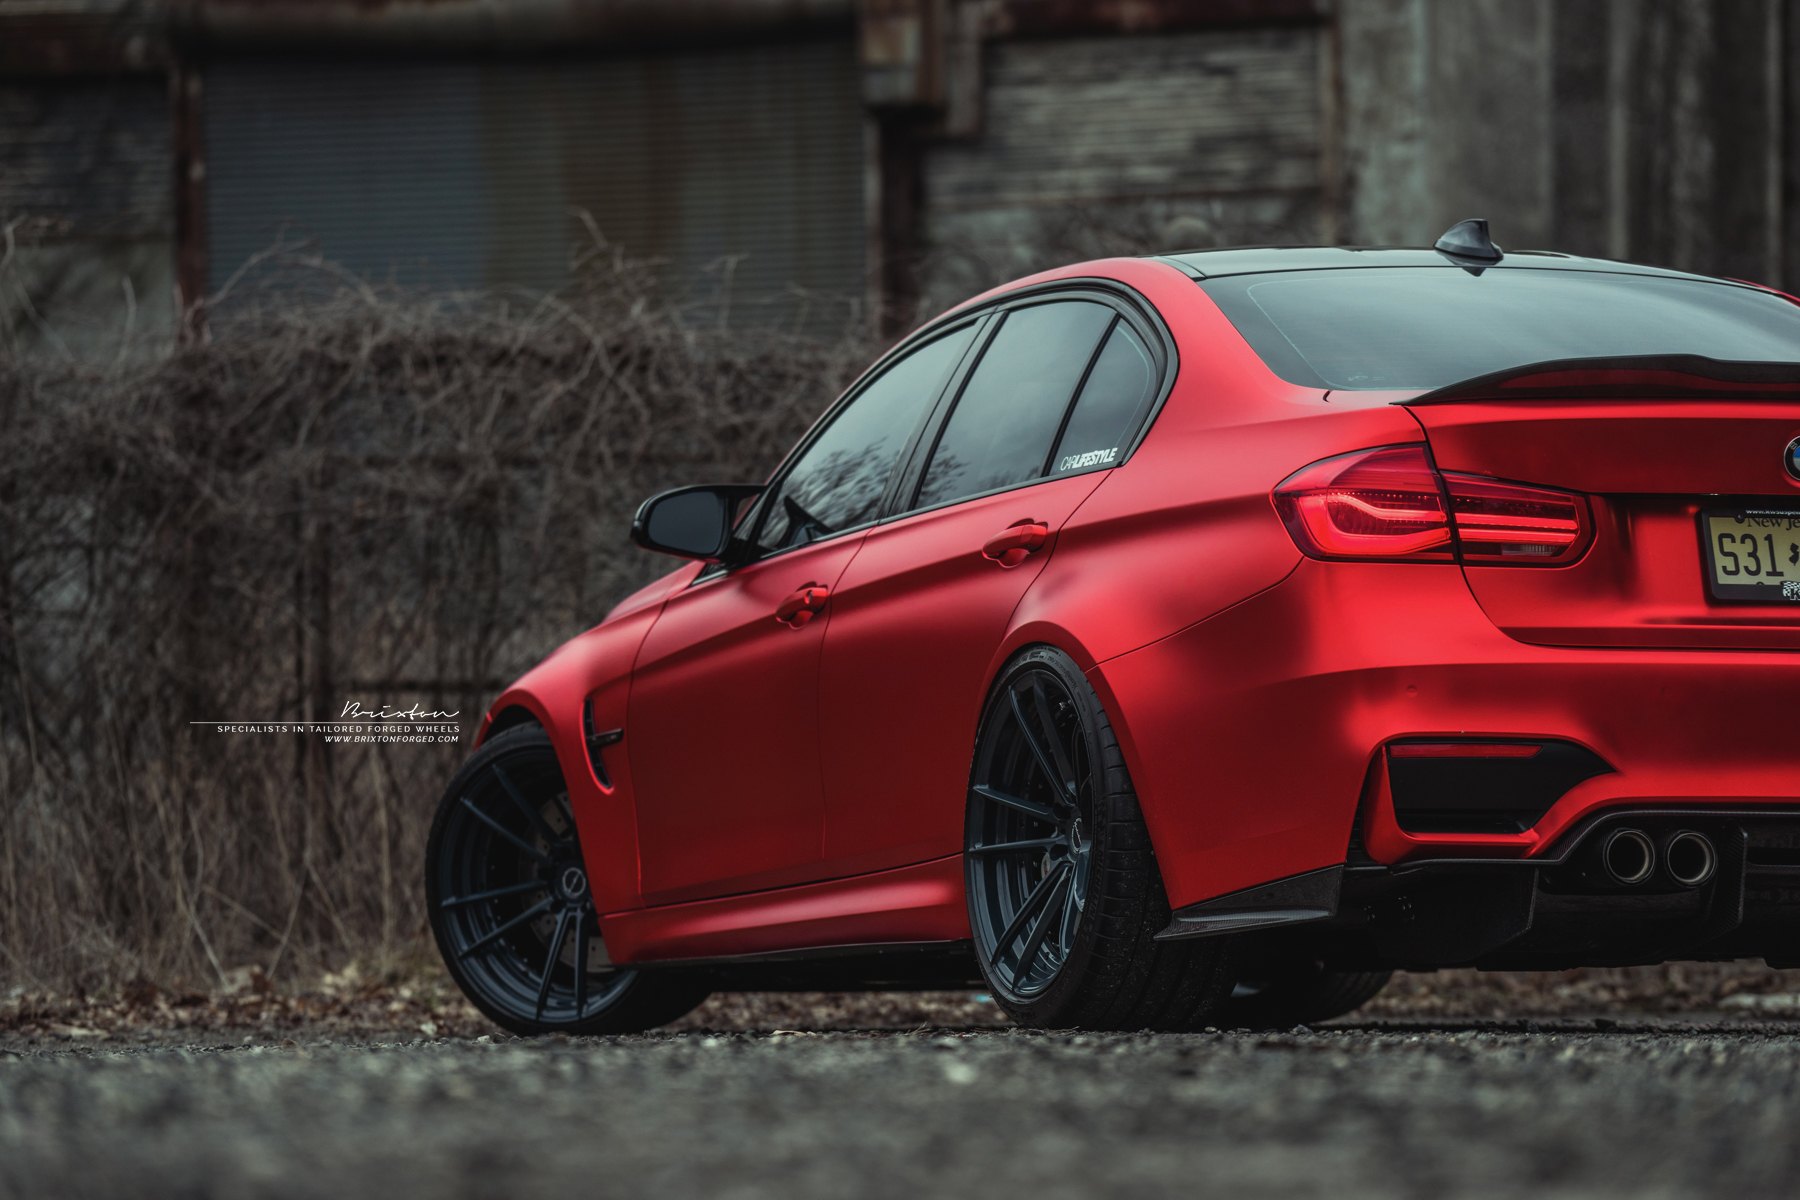 Aftermarket Rear Diffuser on Red BMW 3-Series - Photo by Brixton Forged Wheels